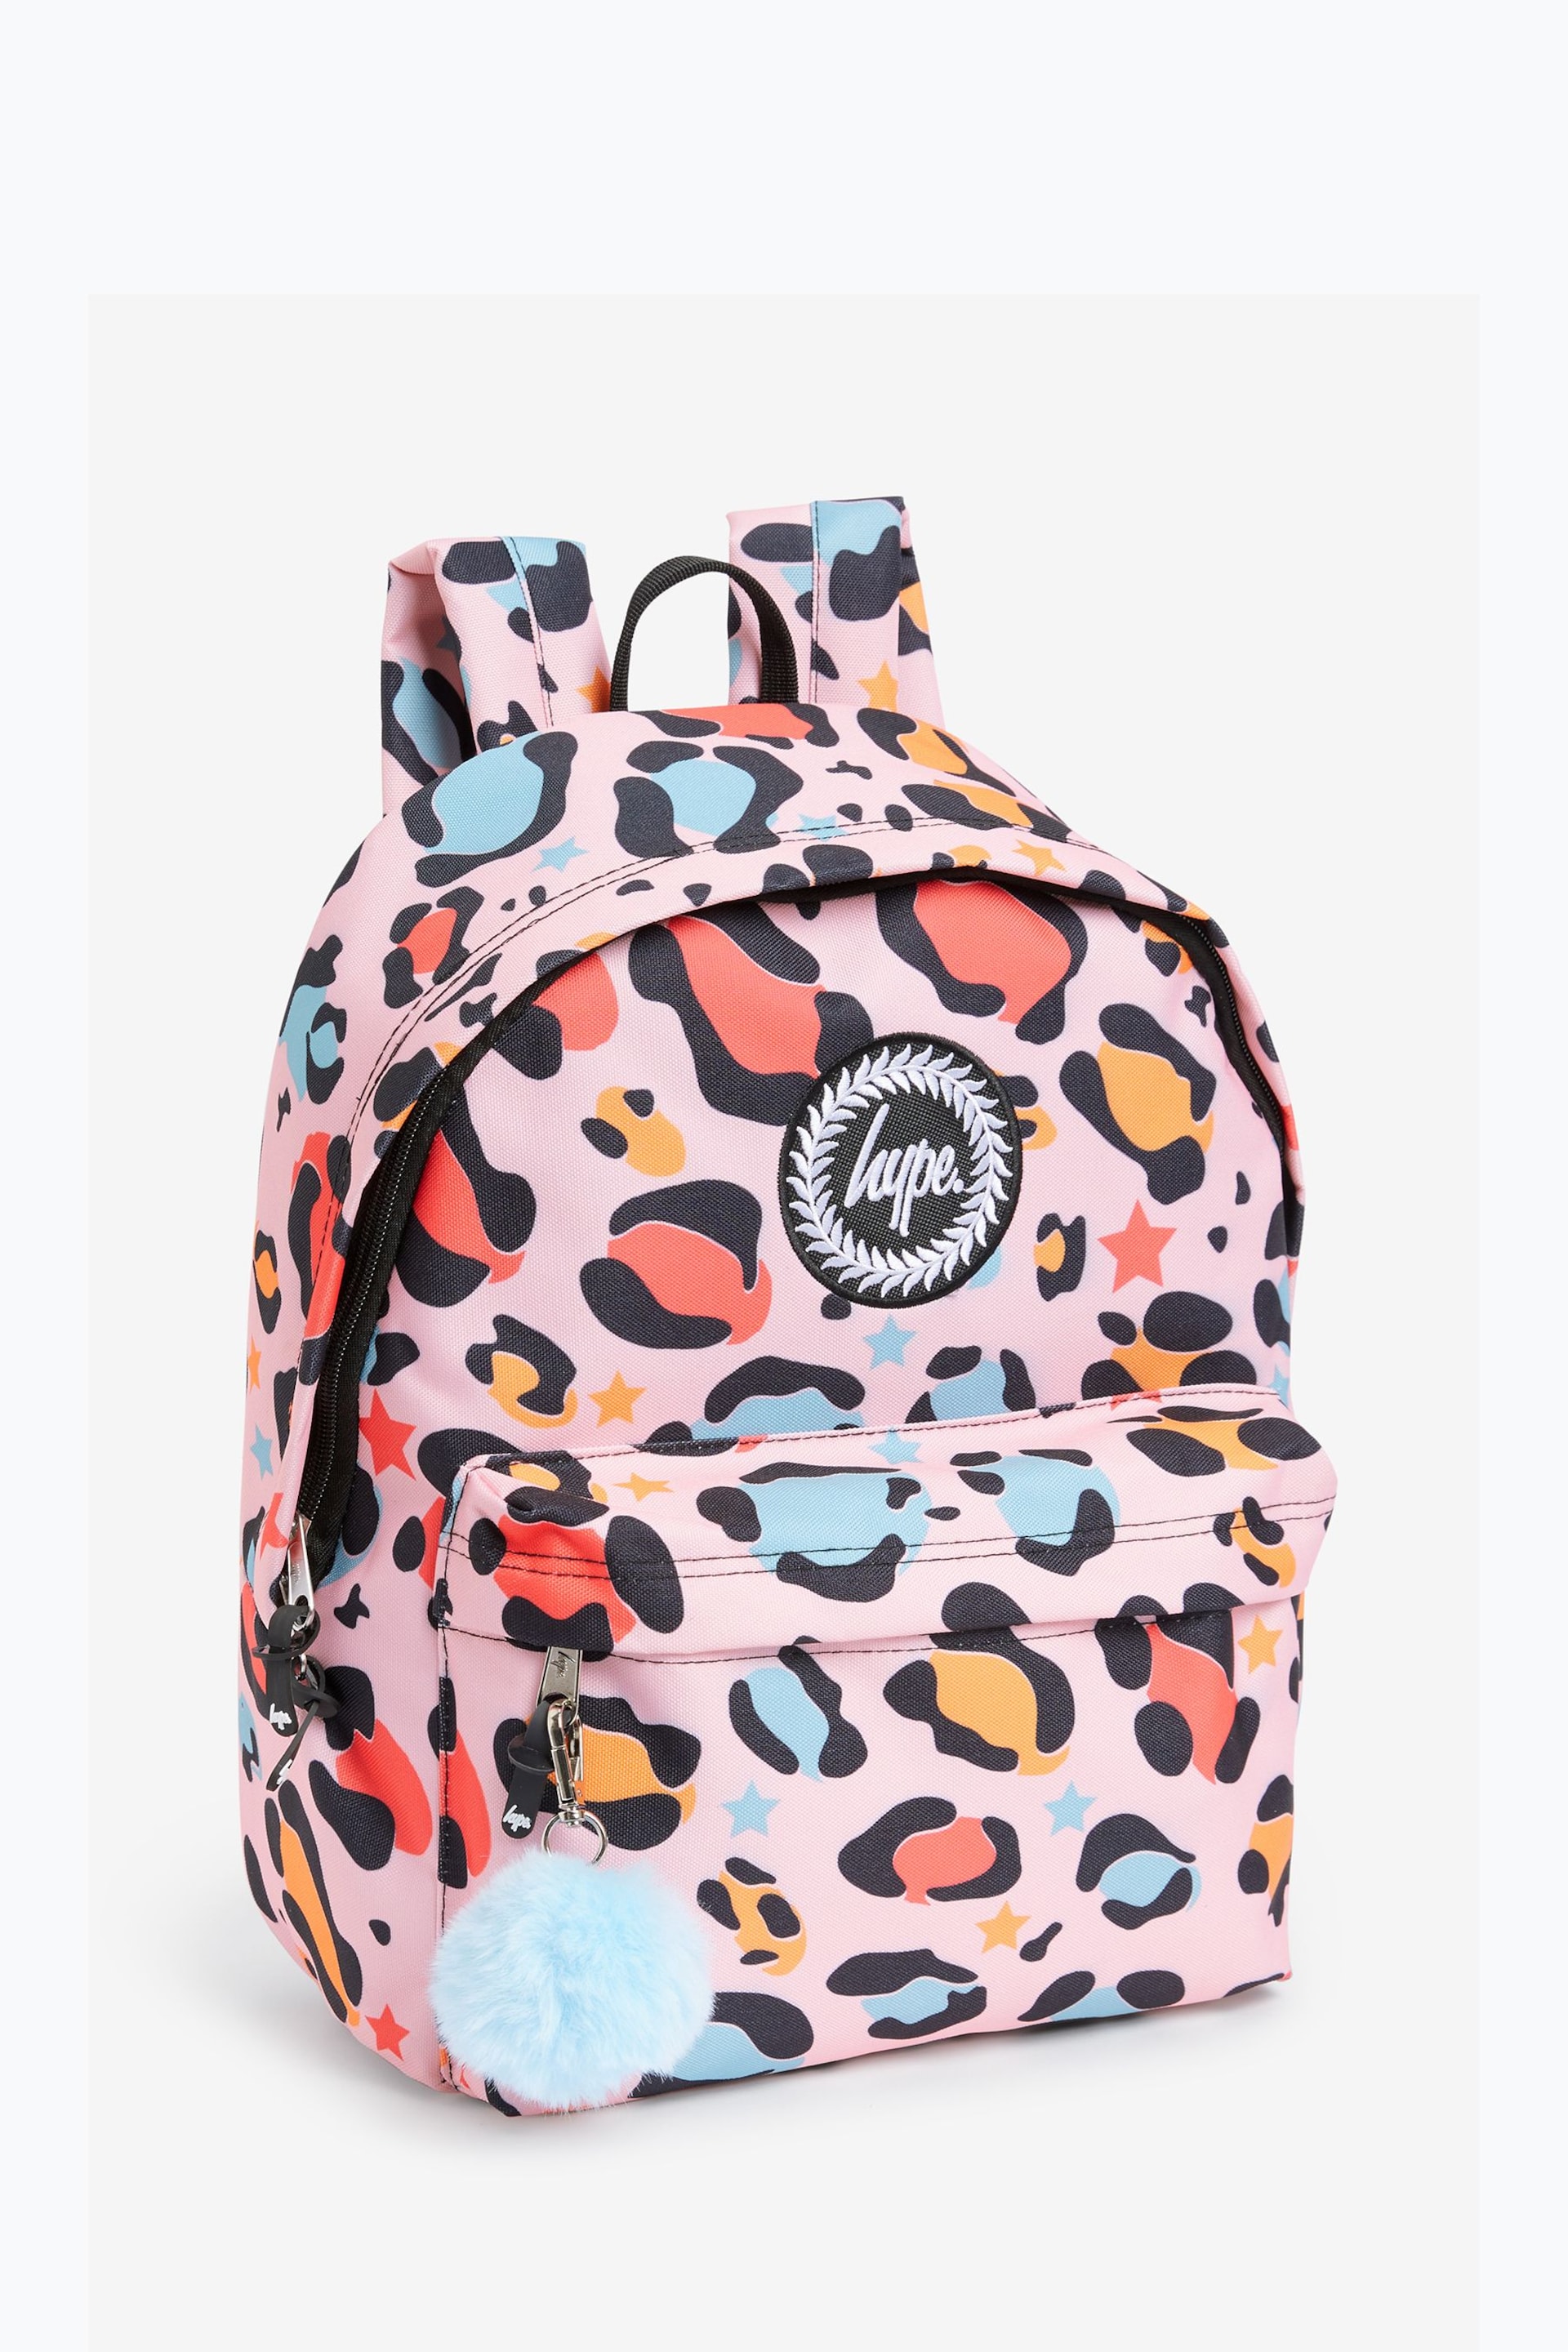 Hype. Star Leopard Pink Backpack - Image 2 of 13